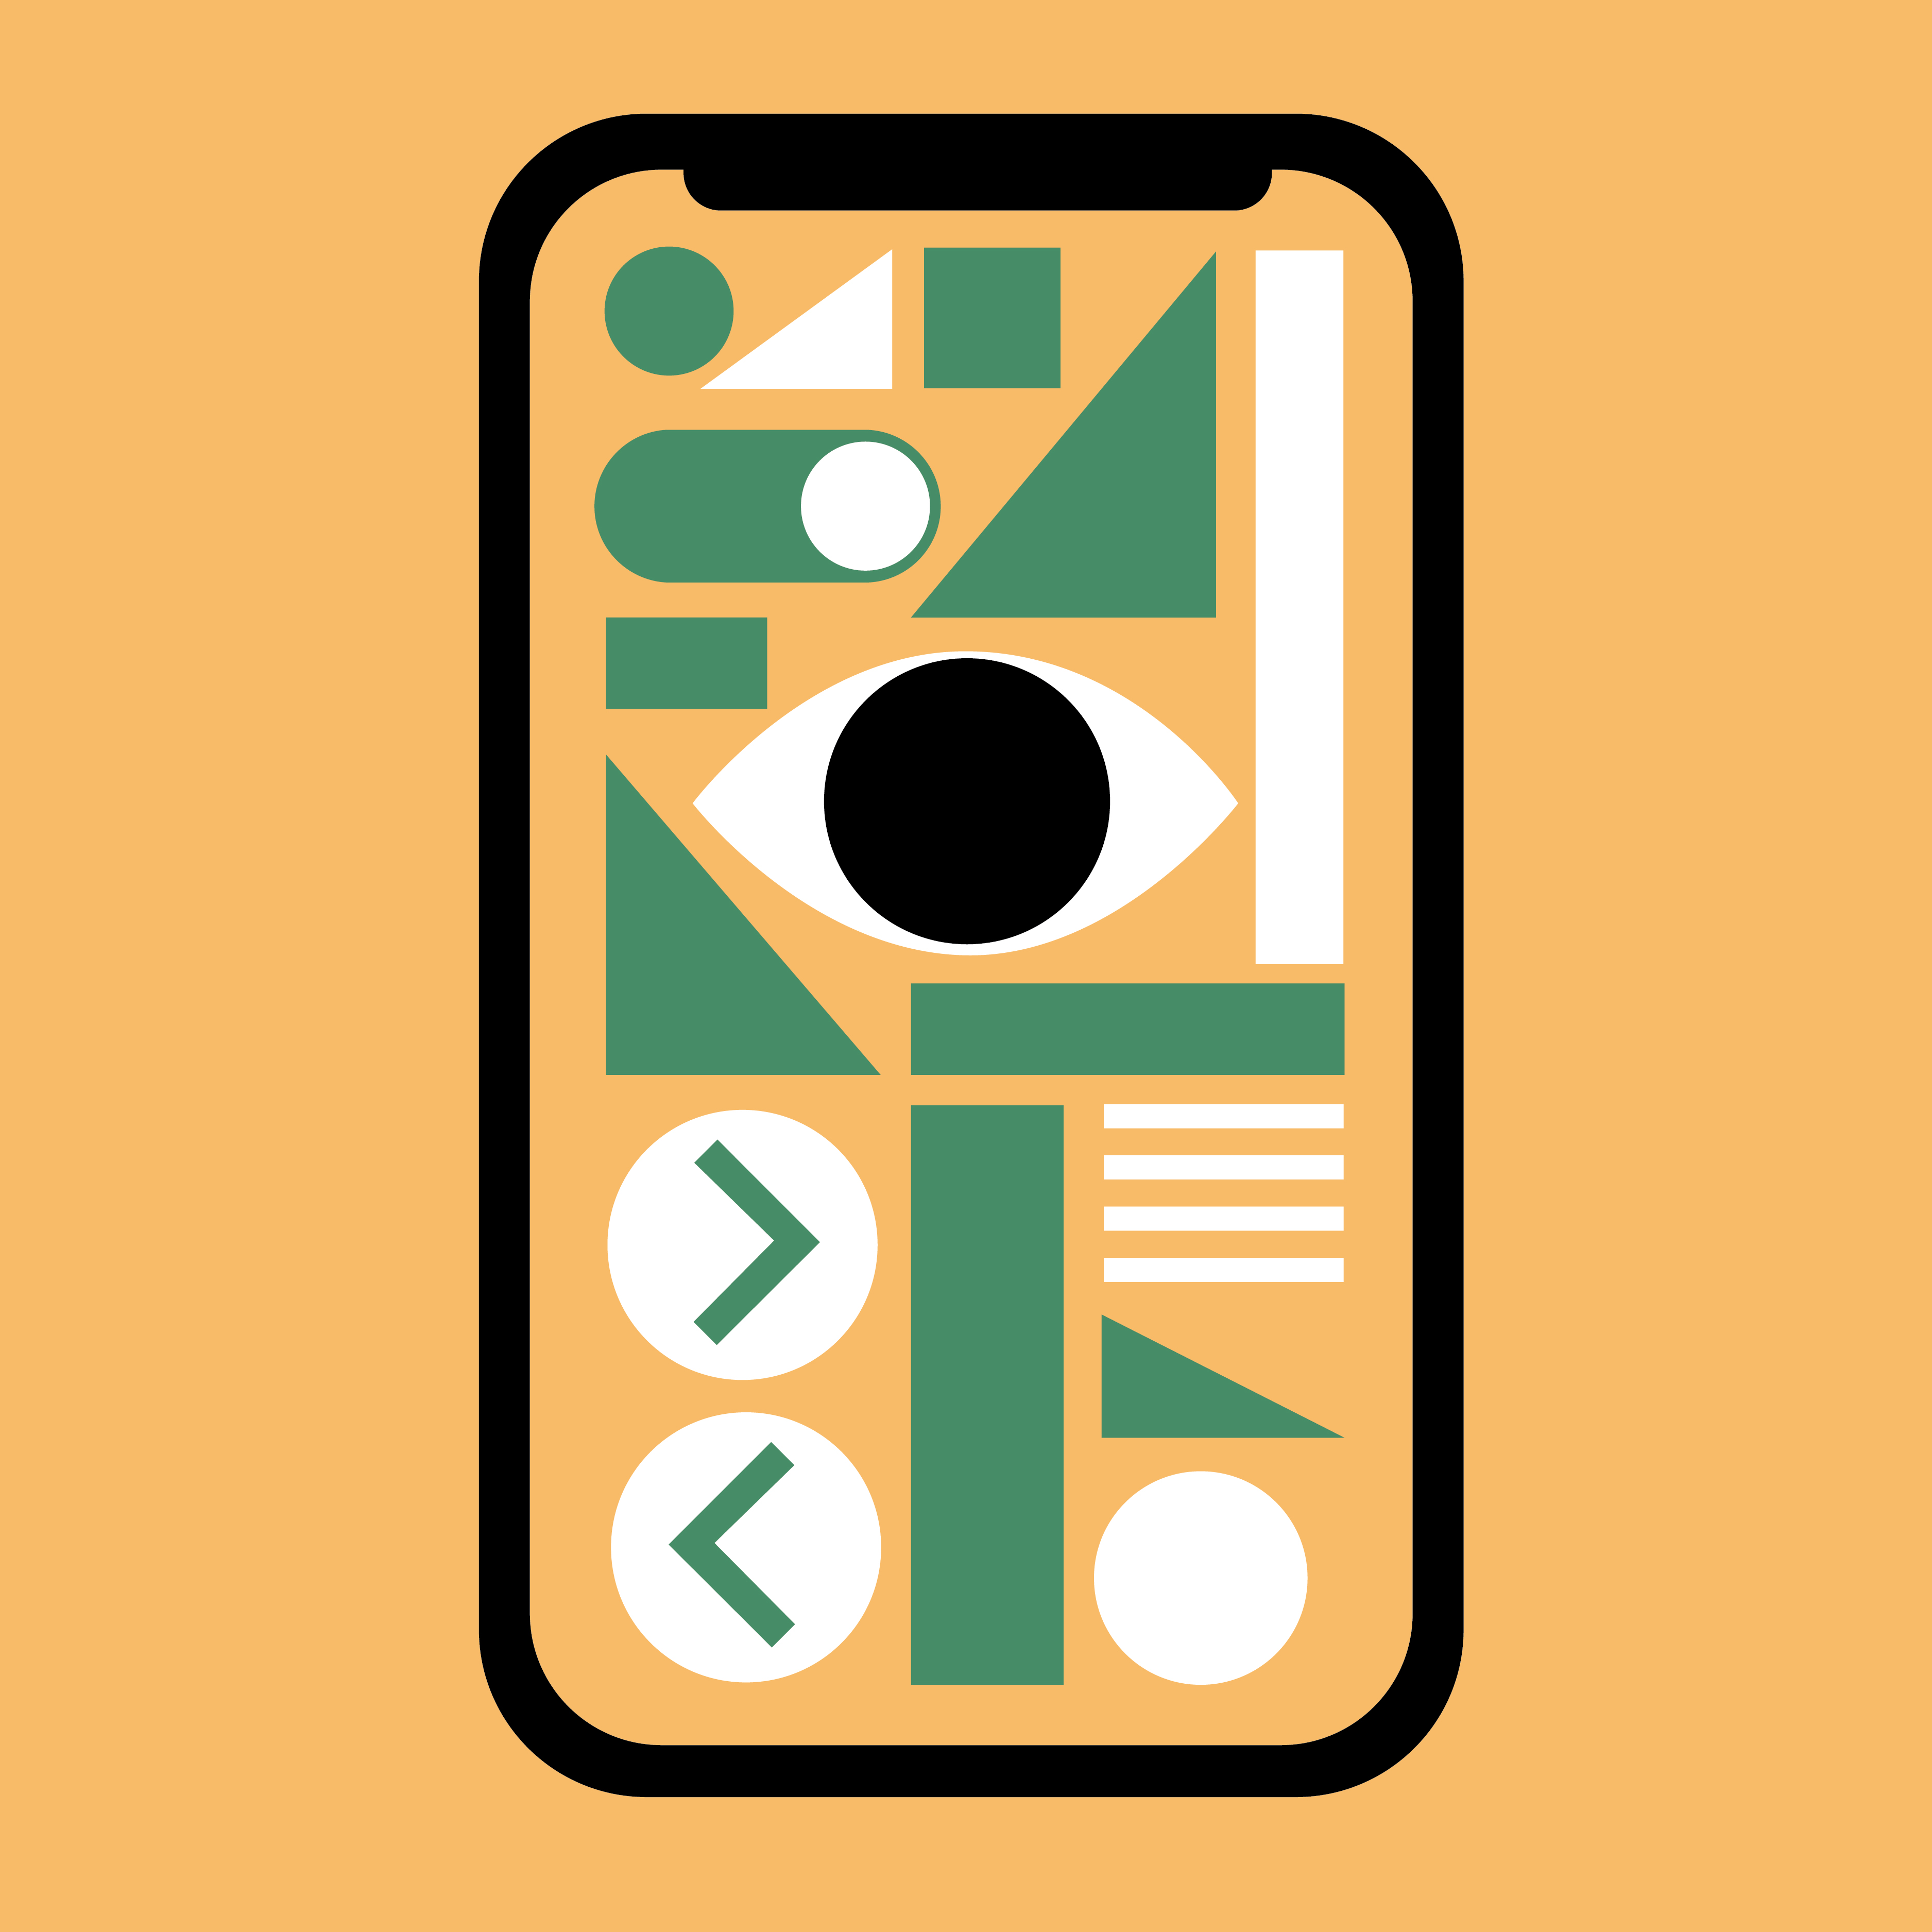 White and green shapes on a mobile phone with a yellow background